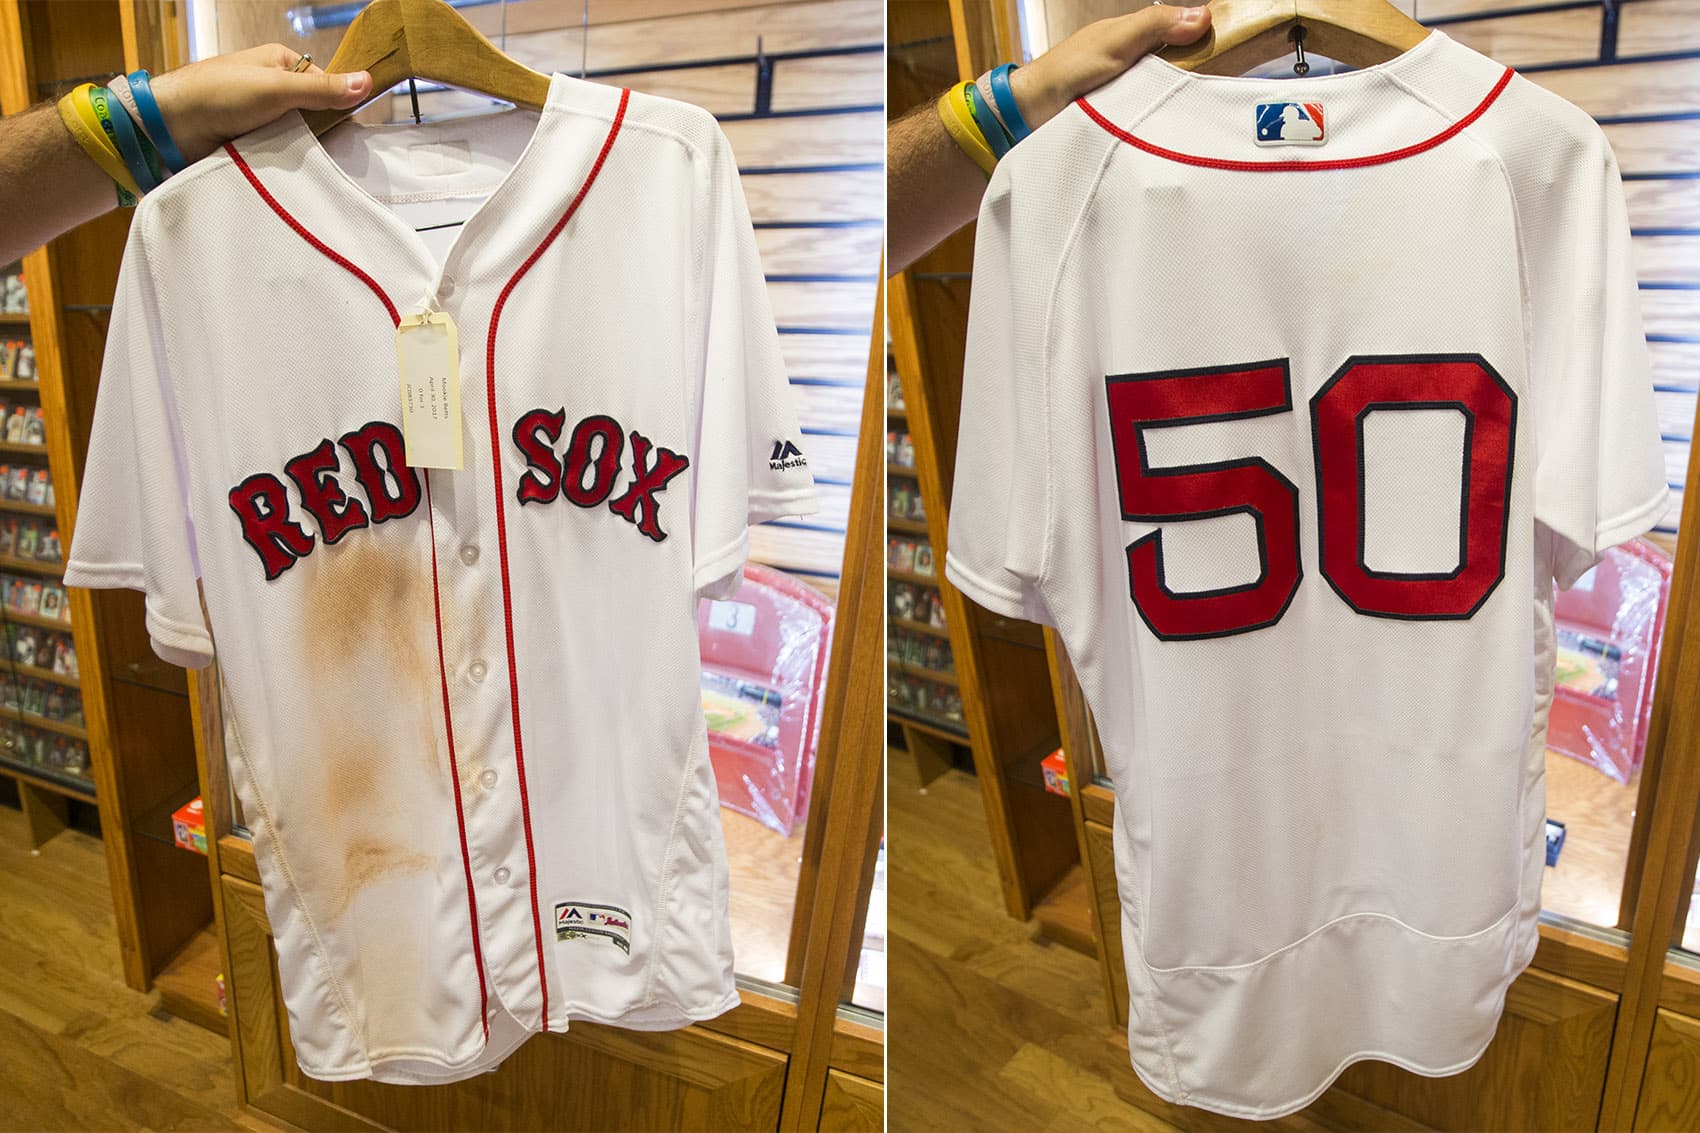 mlb game used jersey